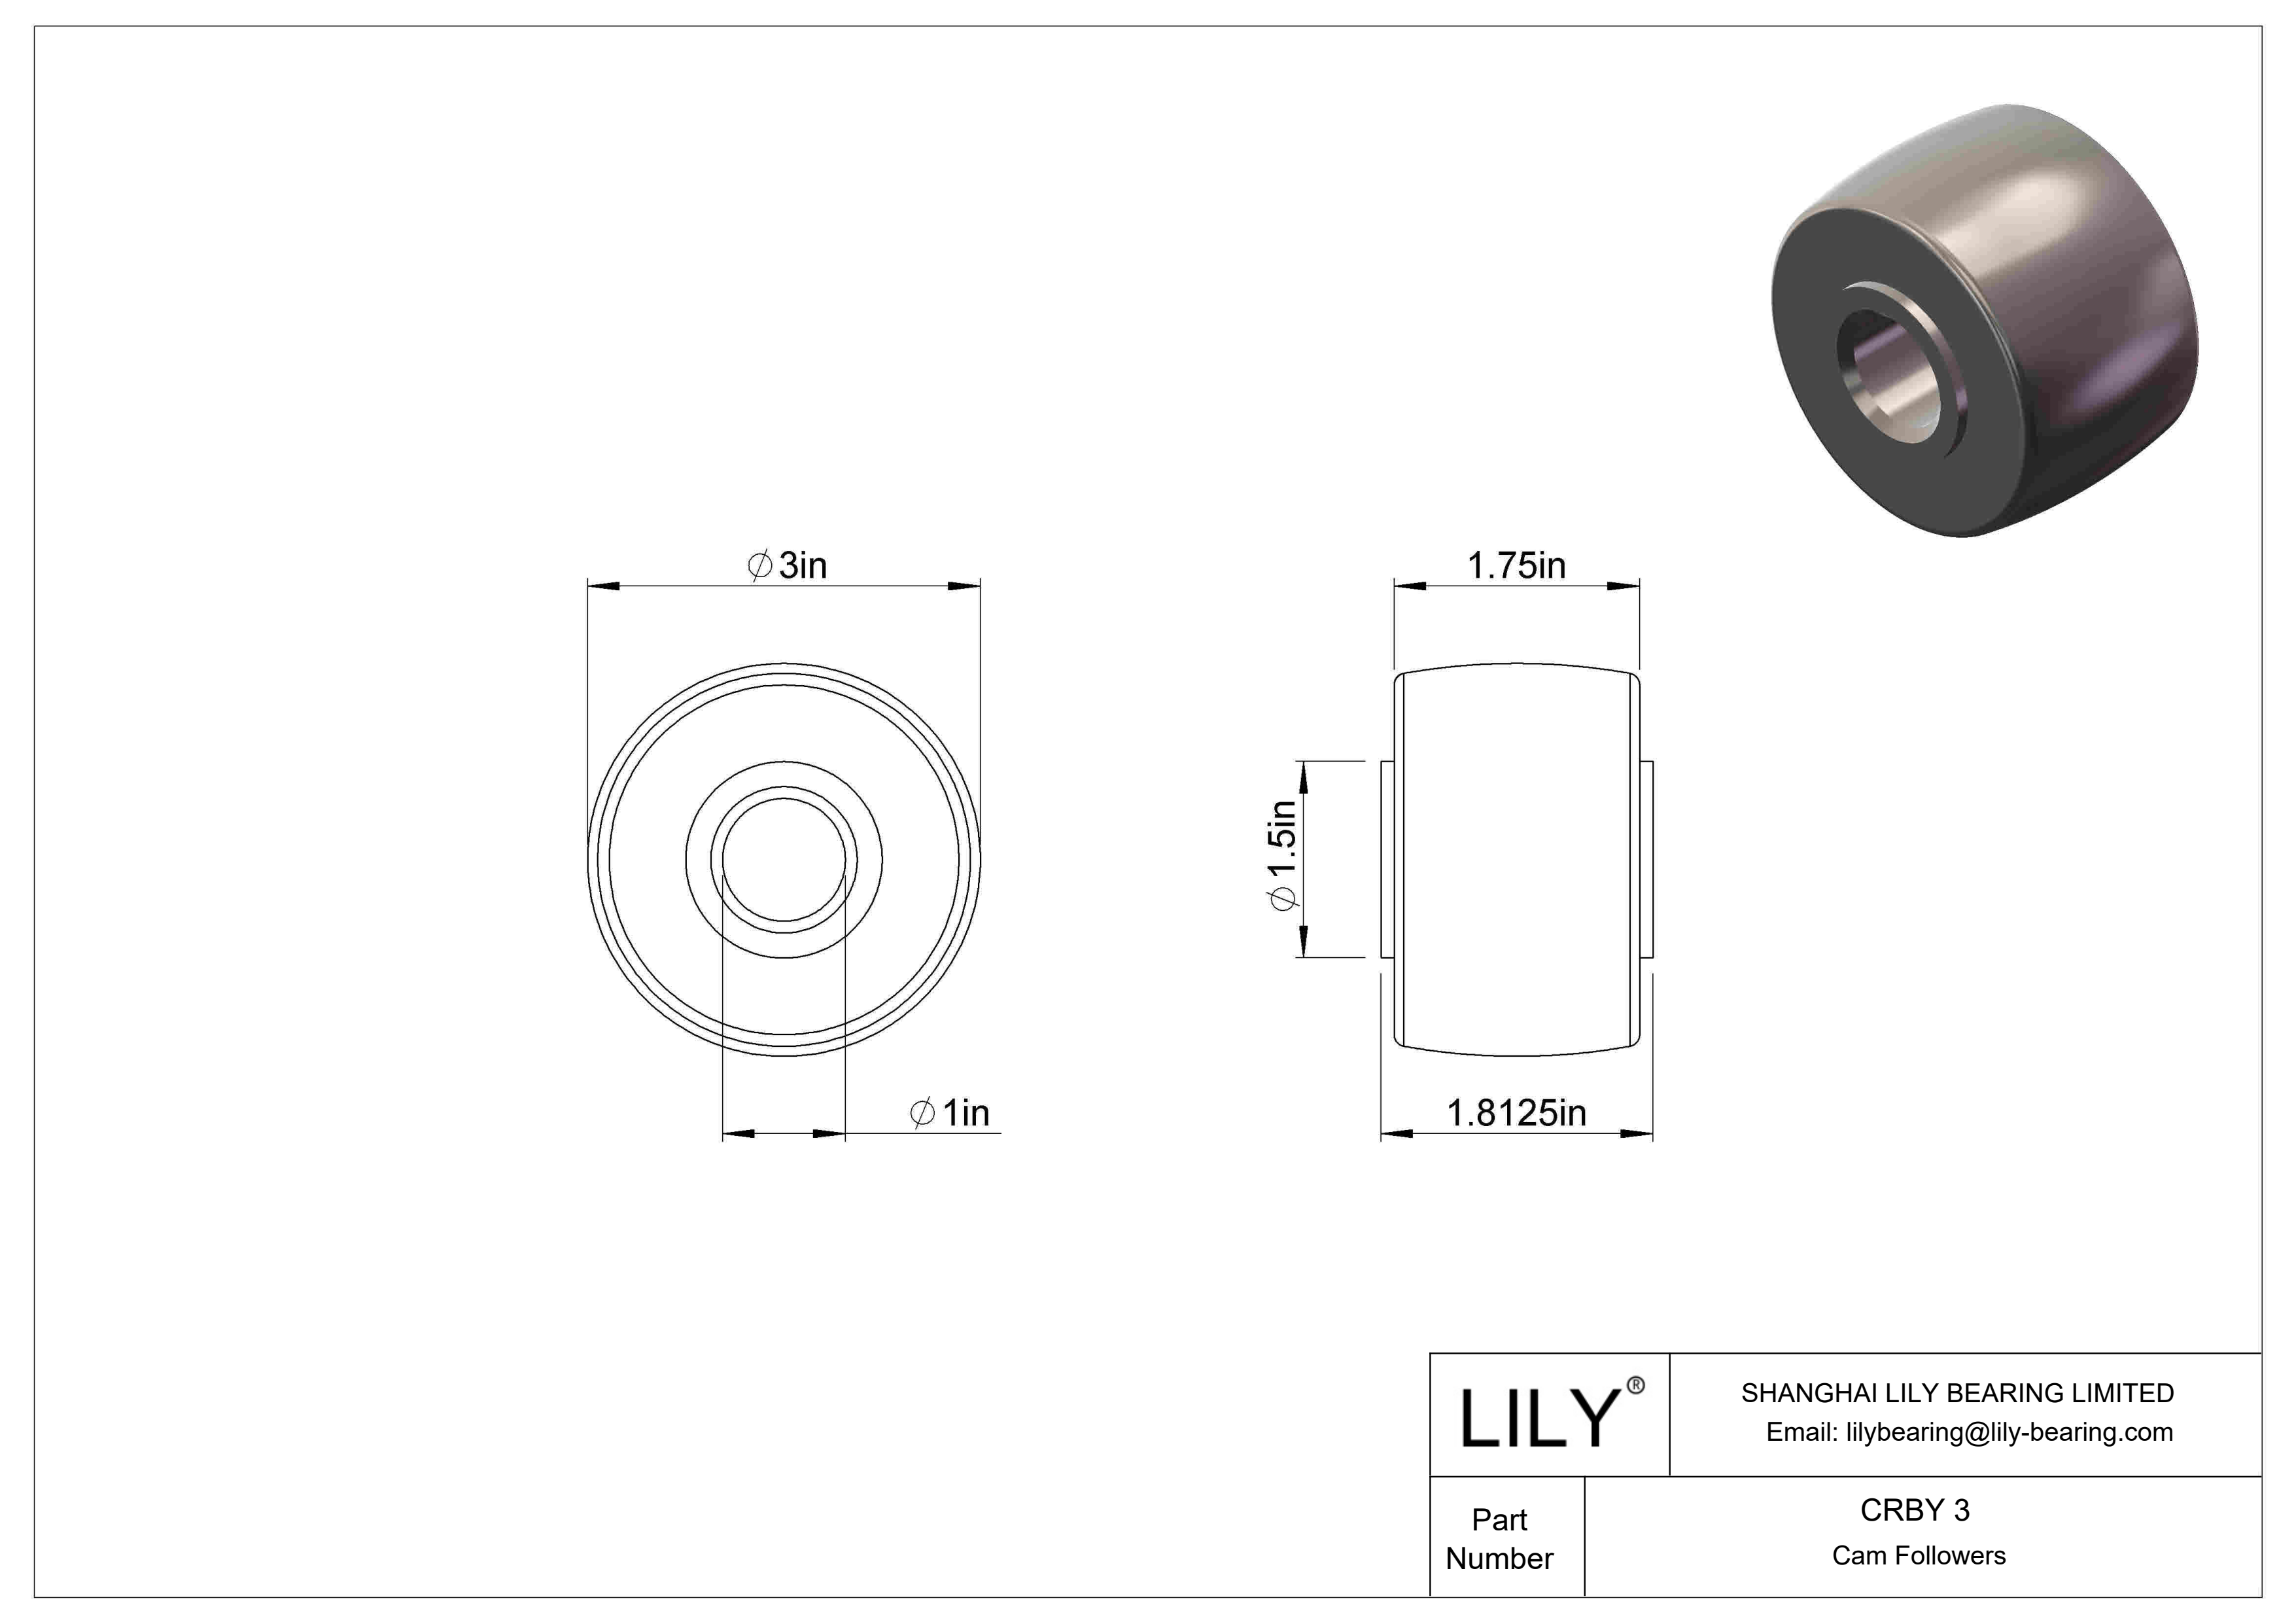 CRBY 3 Roller Cam Follower-Yoke Type cad drawing